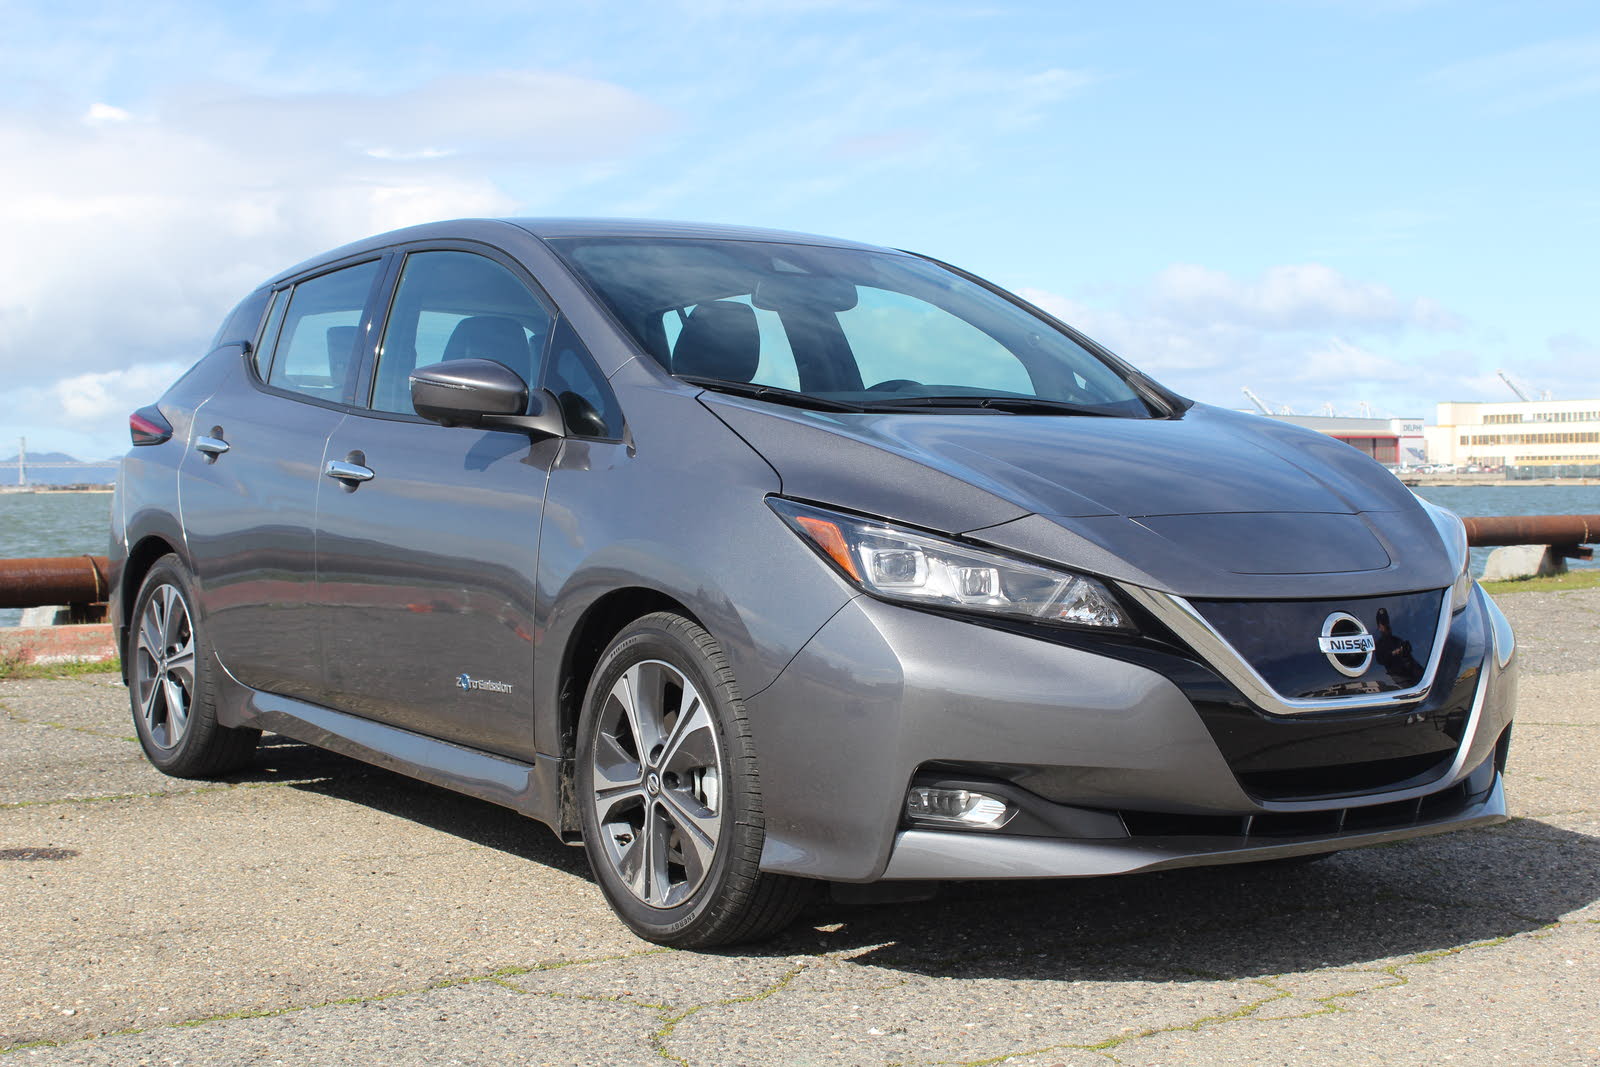 Video Review: 2019 Nissan LEAF Expert Test Drive - CarGurus